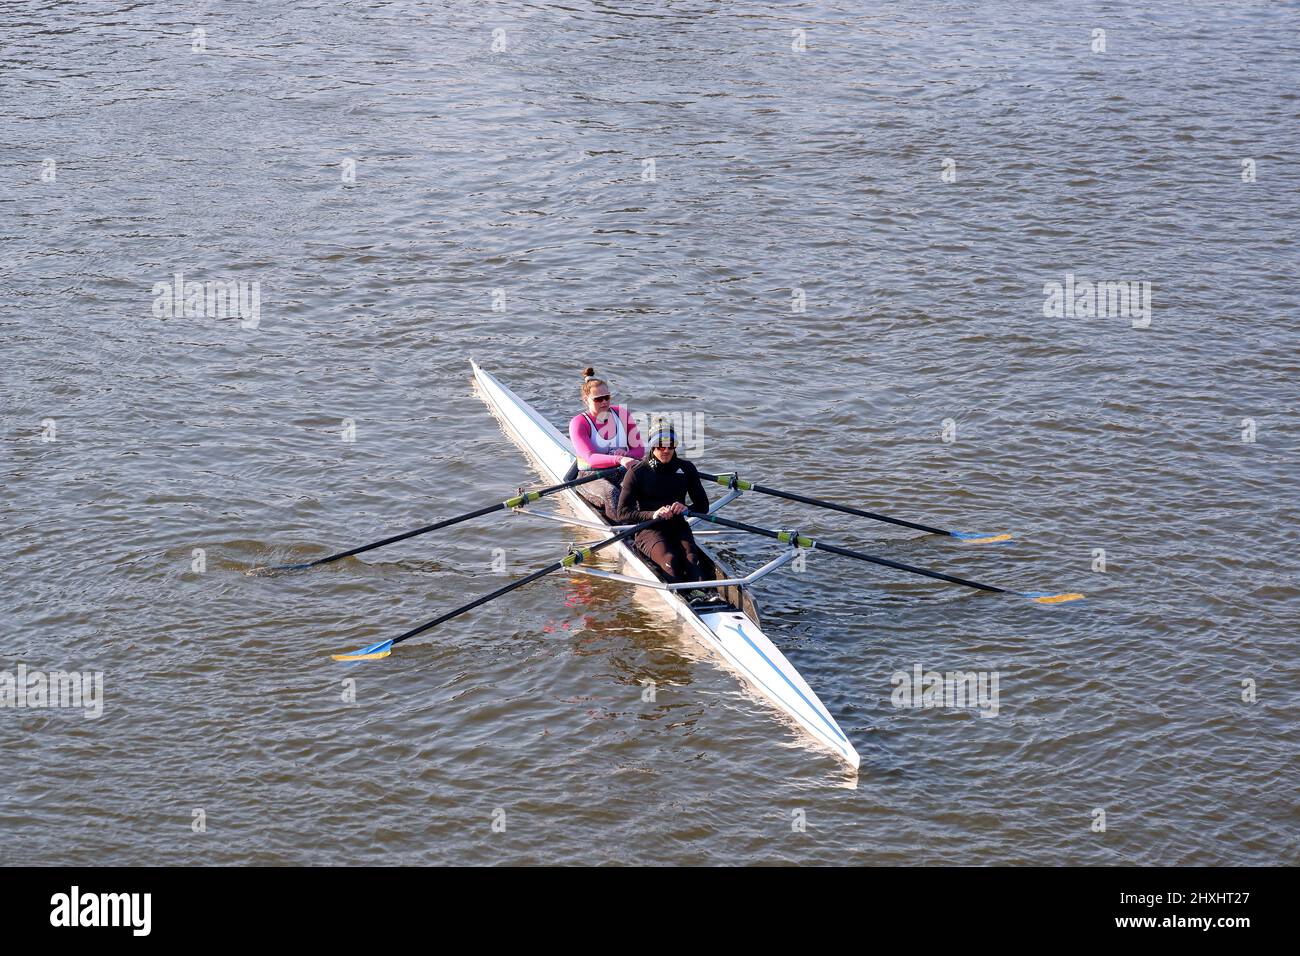 Two people in a fast row boat Stock Photo